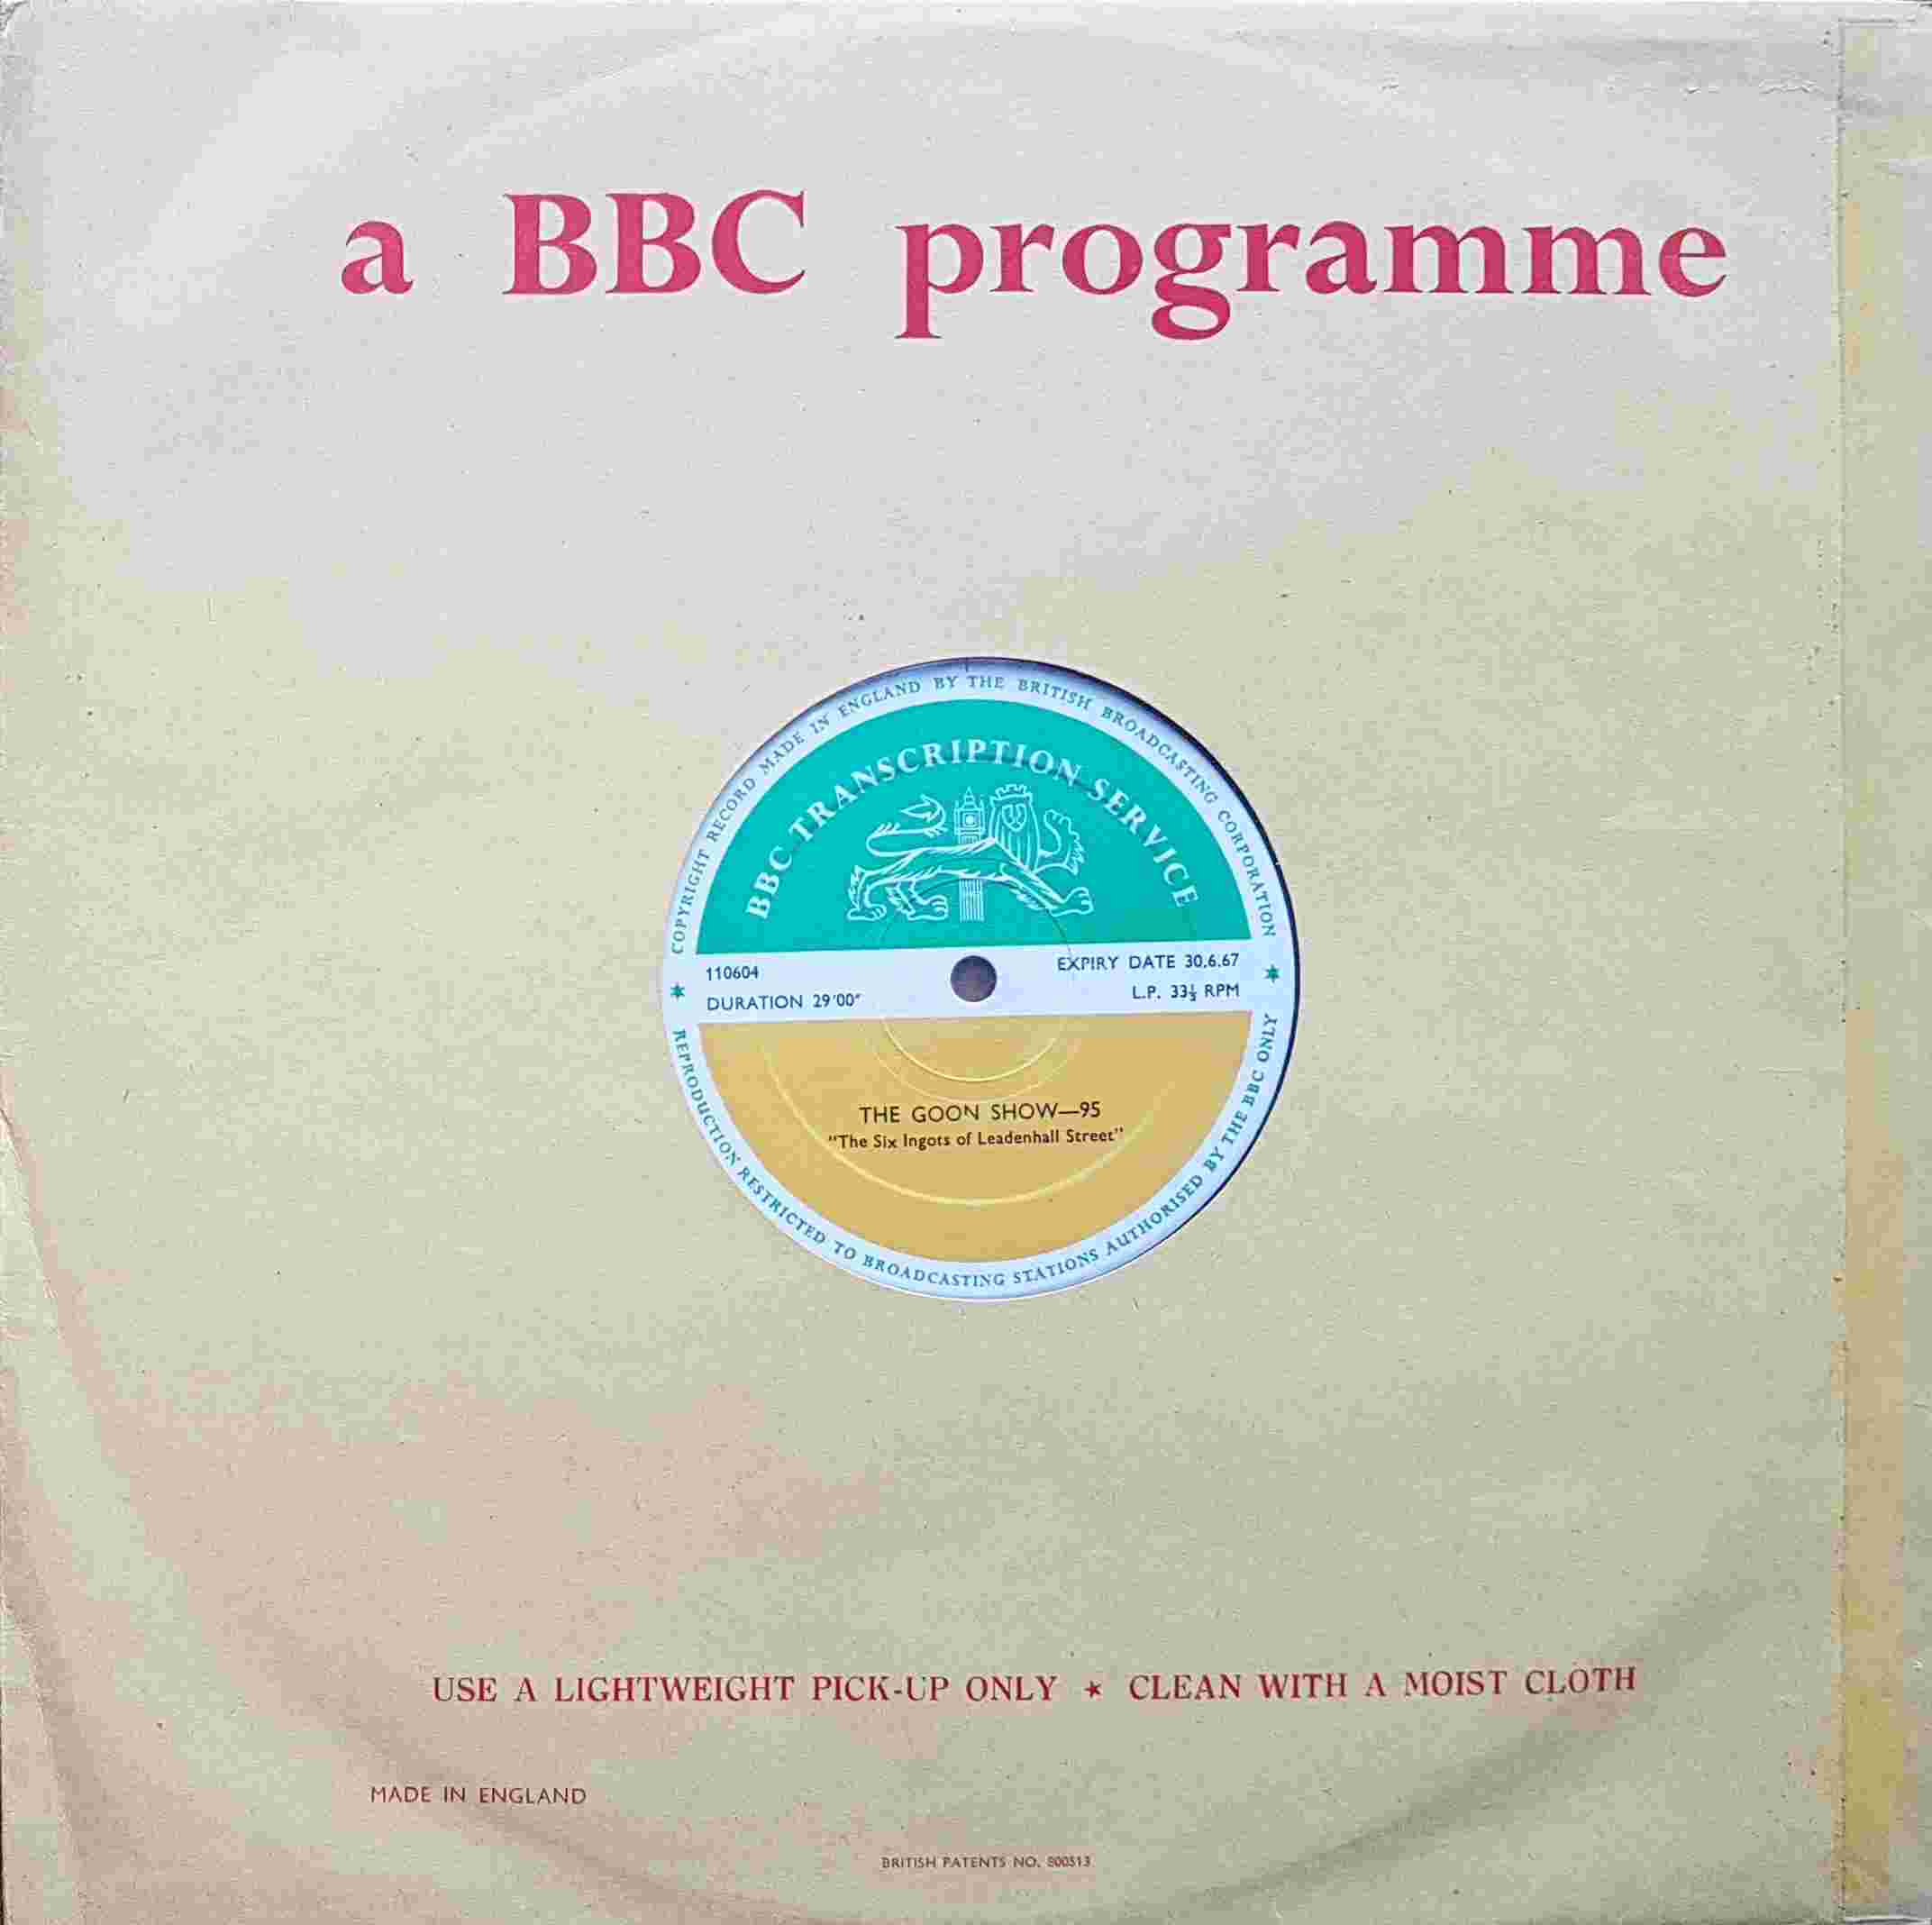 Picture of 110604 The Goon show - 95 & 96 by artist Spike Milligan / Eric Sykes from the BBC albums - Records and Tapes library